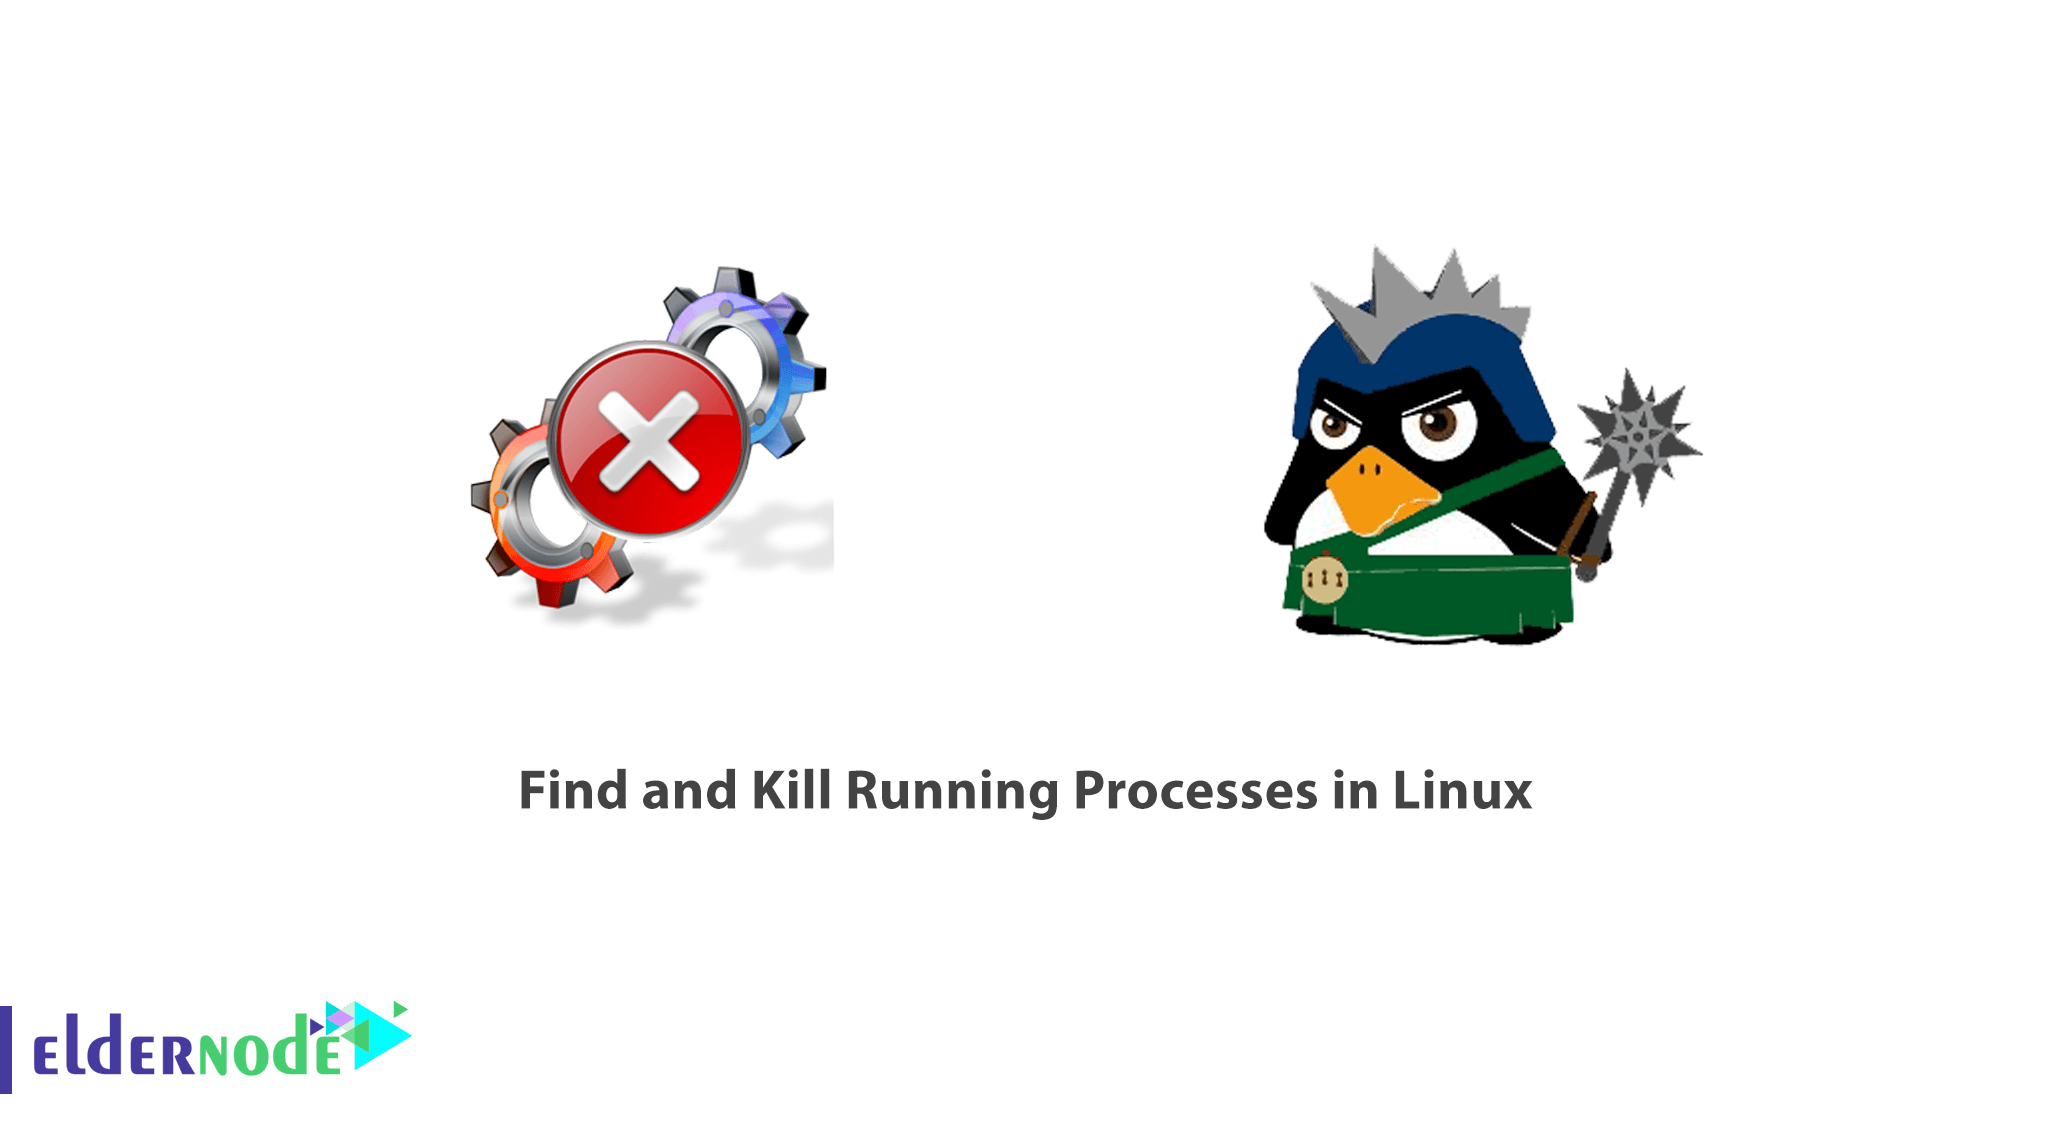 How to Find and Kill Running Processes in Linux